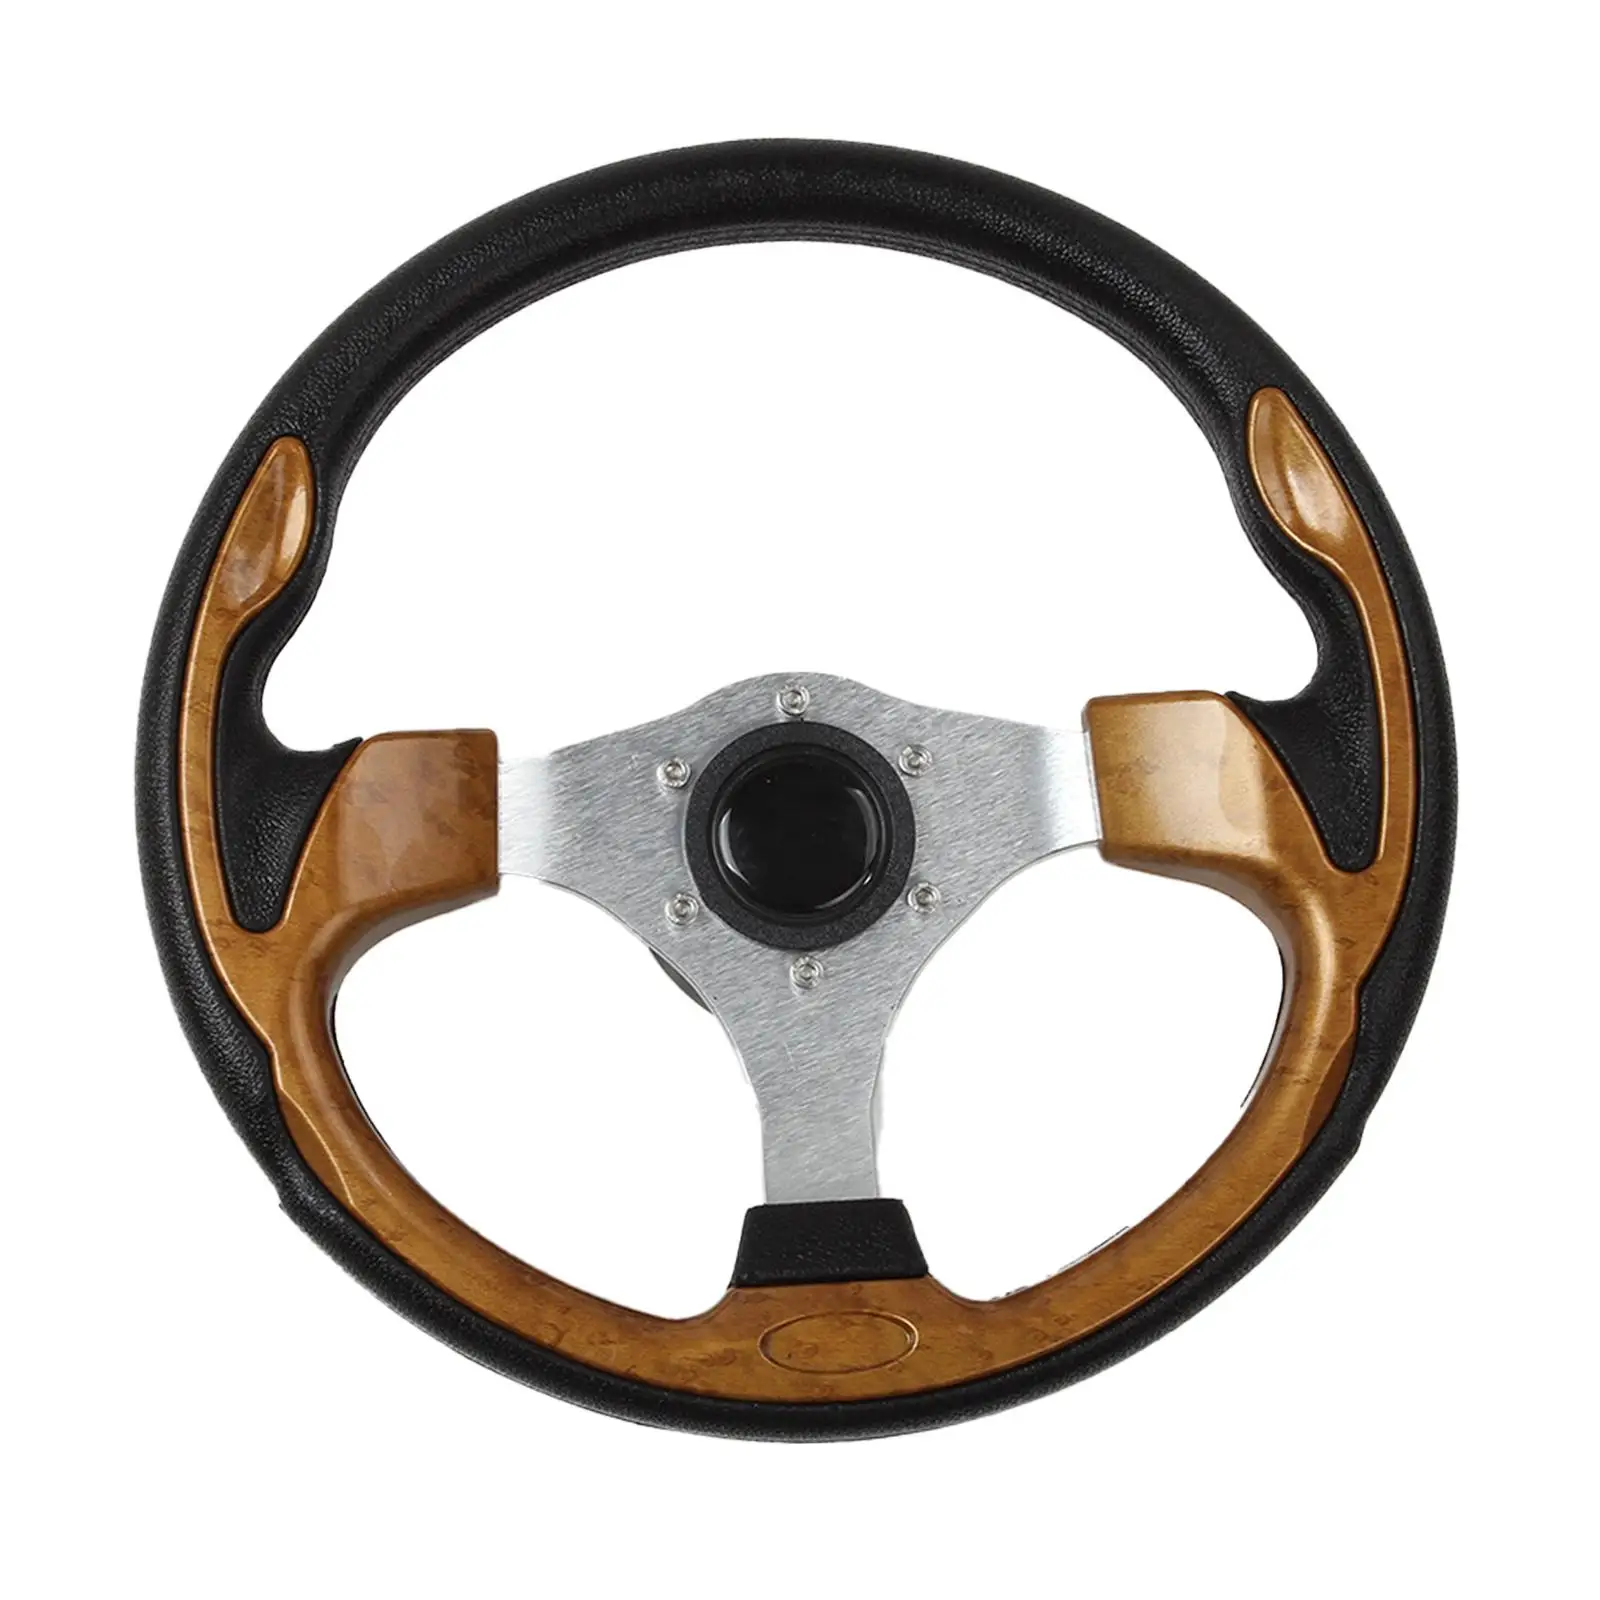 Boat Steering Wheel Universal Fitment Easily Install Marine Steering System for Pontoon Boats Marine Boats Yachts Supplies